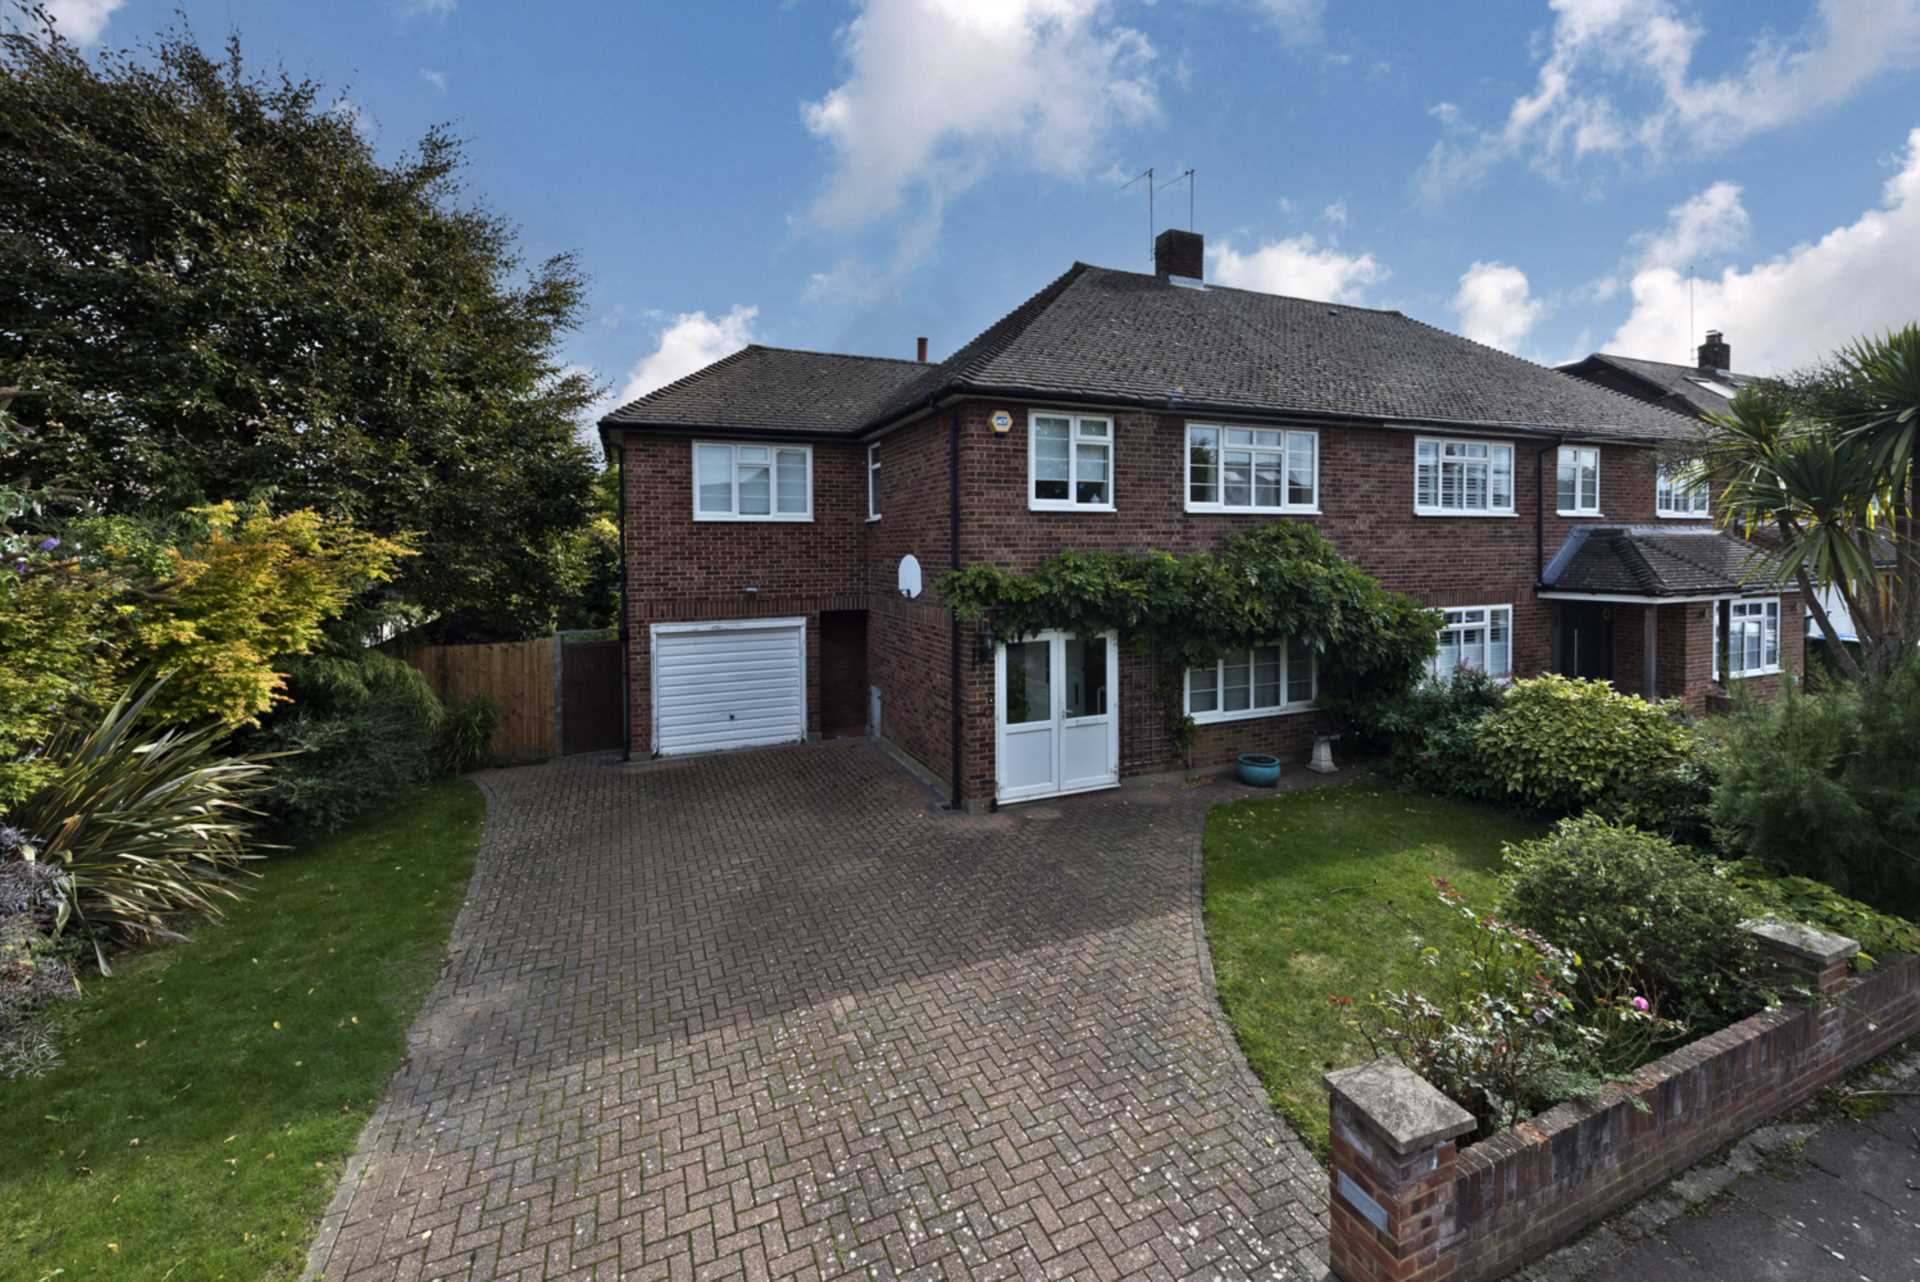 4 bed Semi-Detached House for rent in Thames Ditton. From Aldous Craig Estates